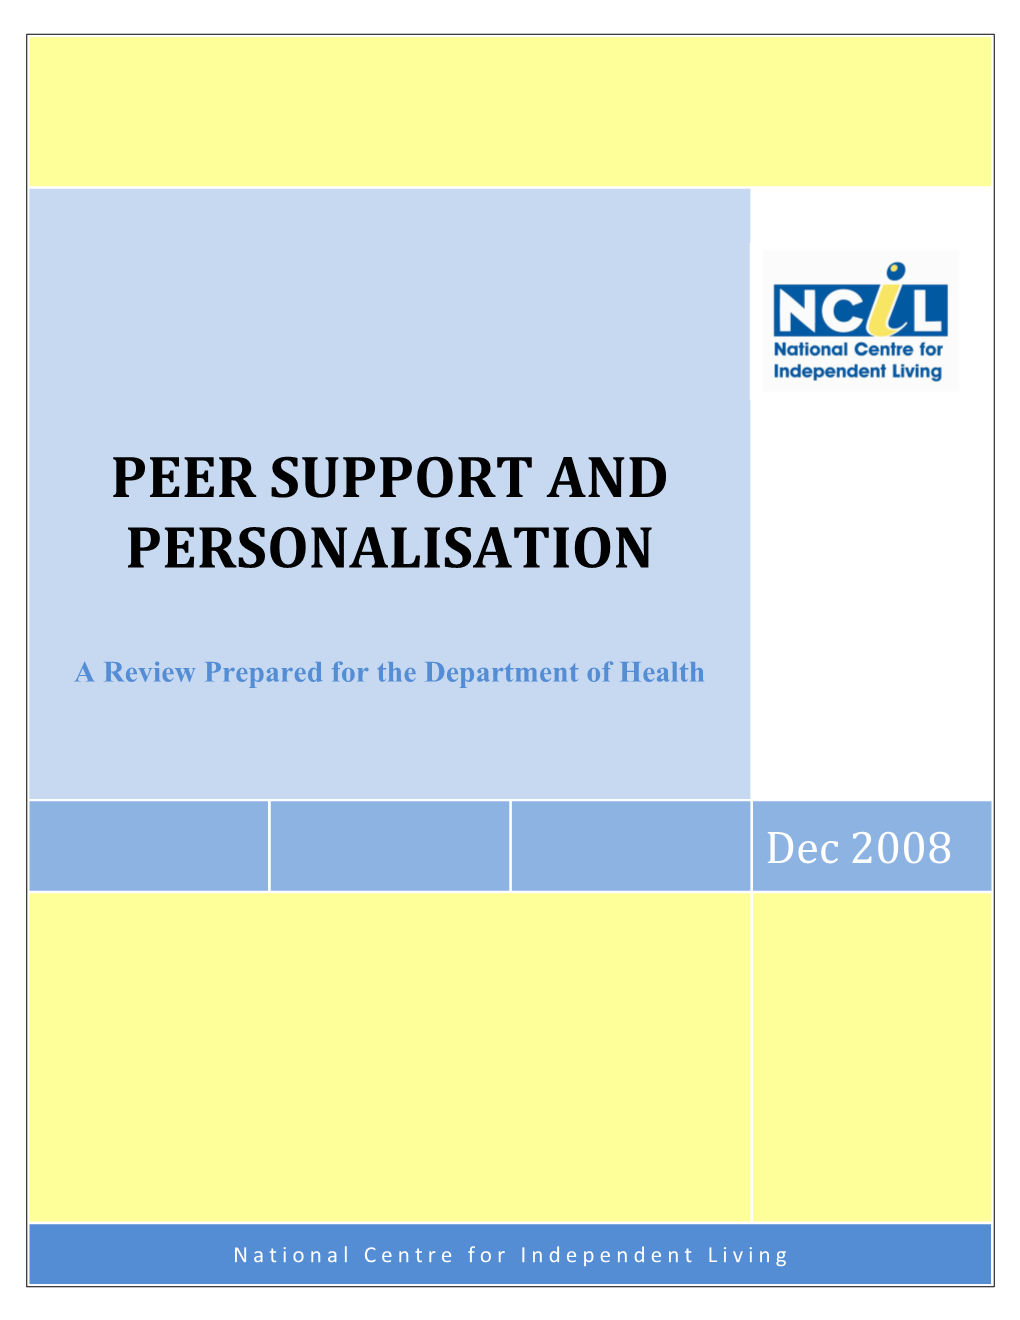 Peer Support and Personalisation